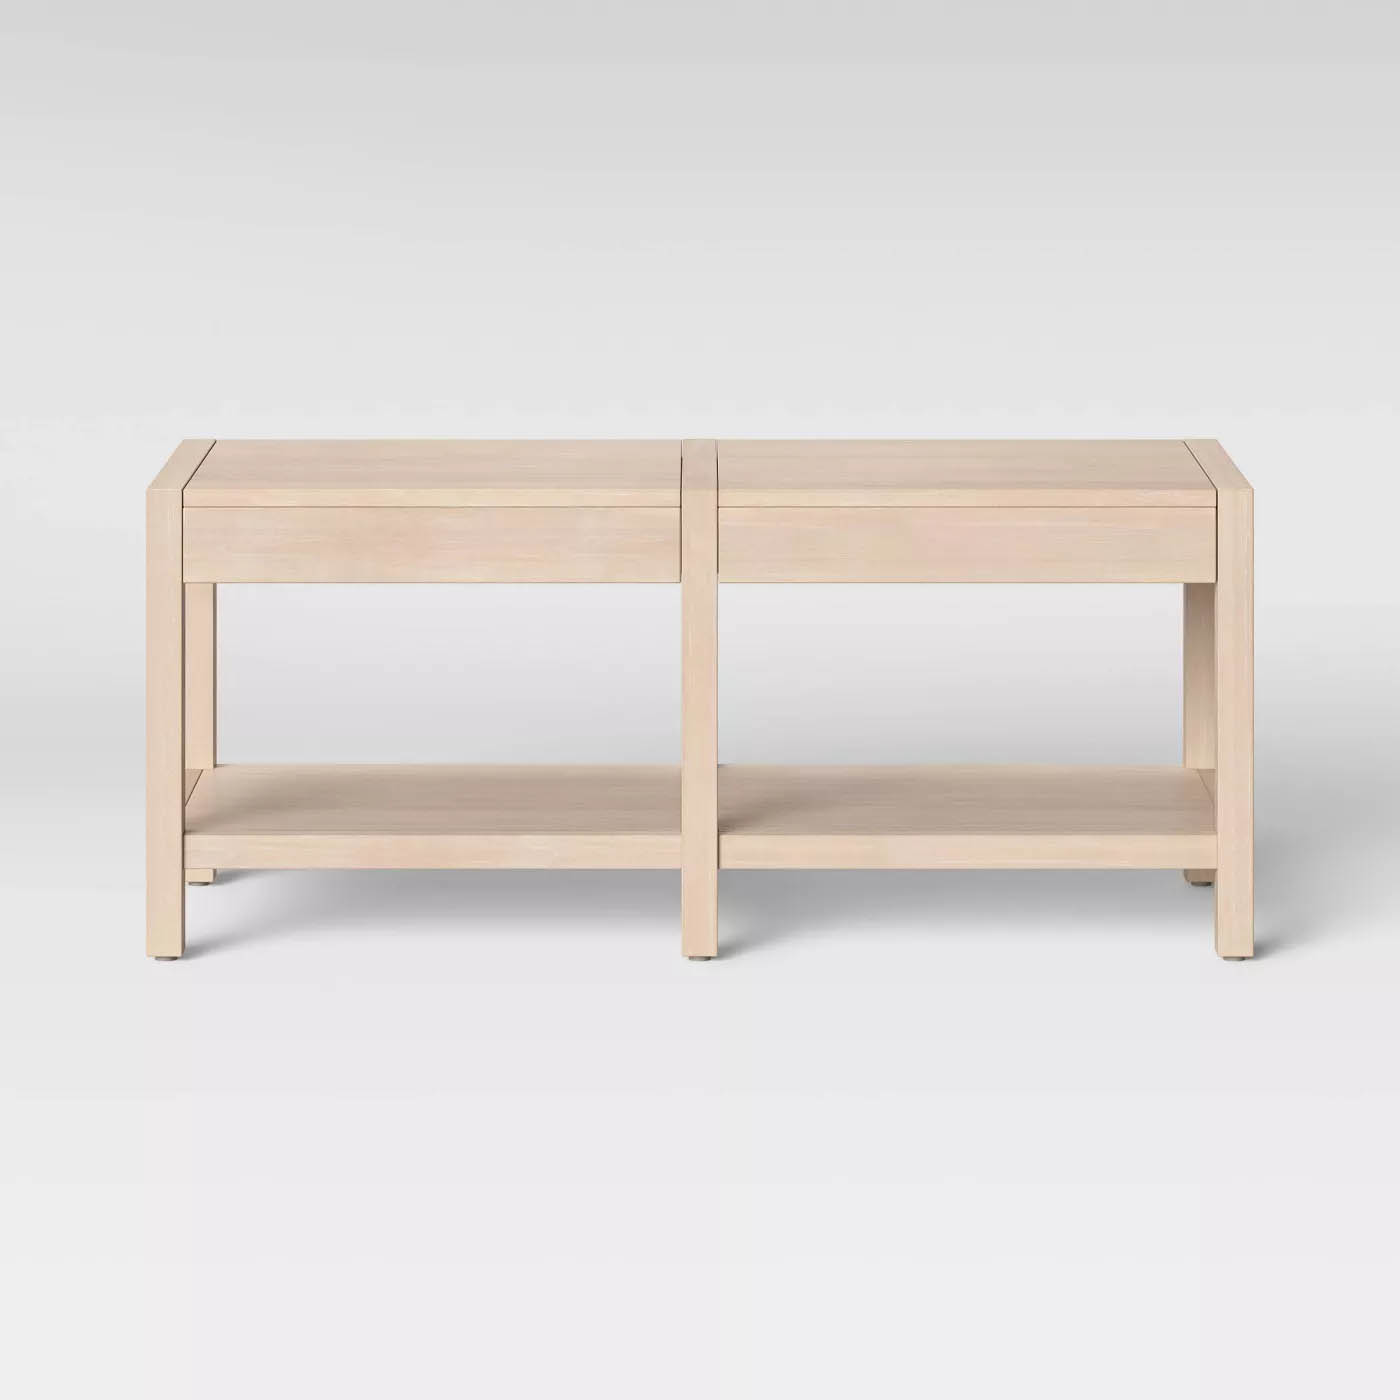 Target End of Bed Bench